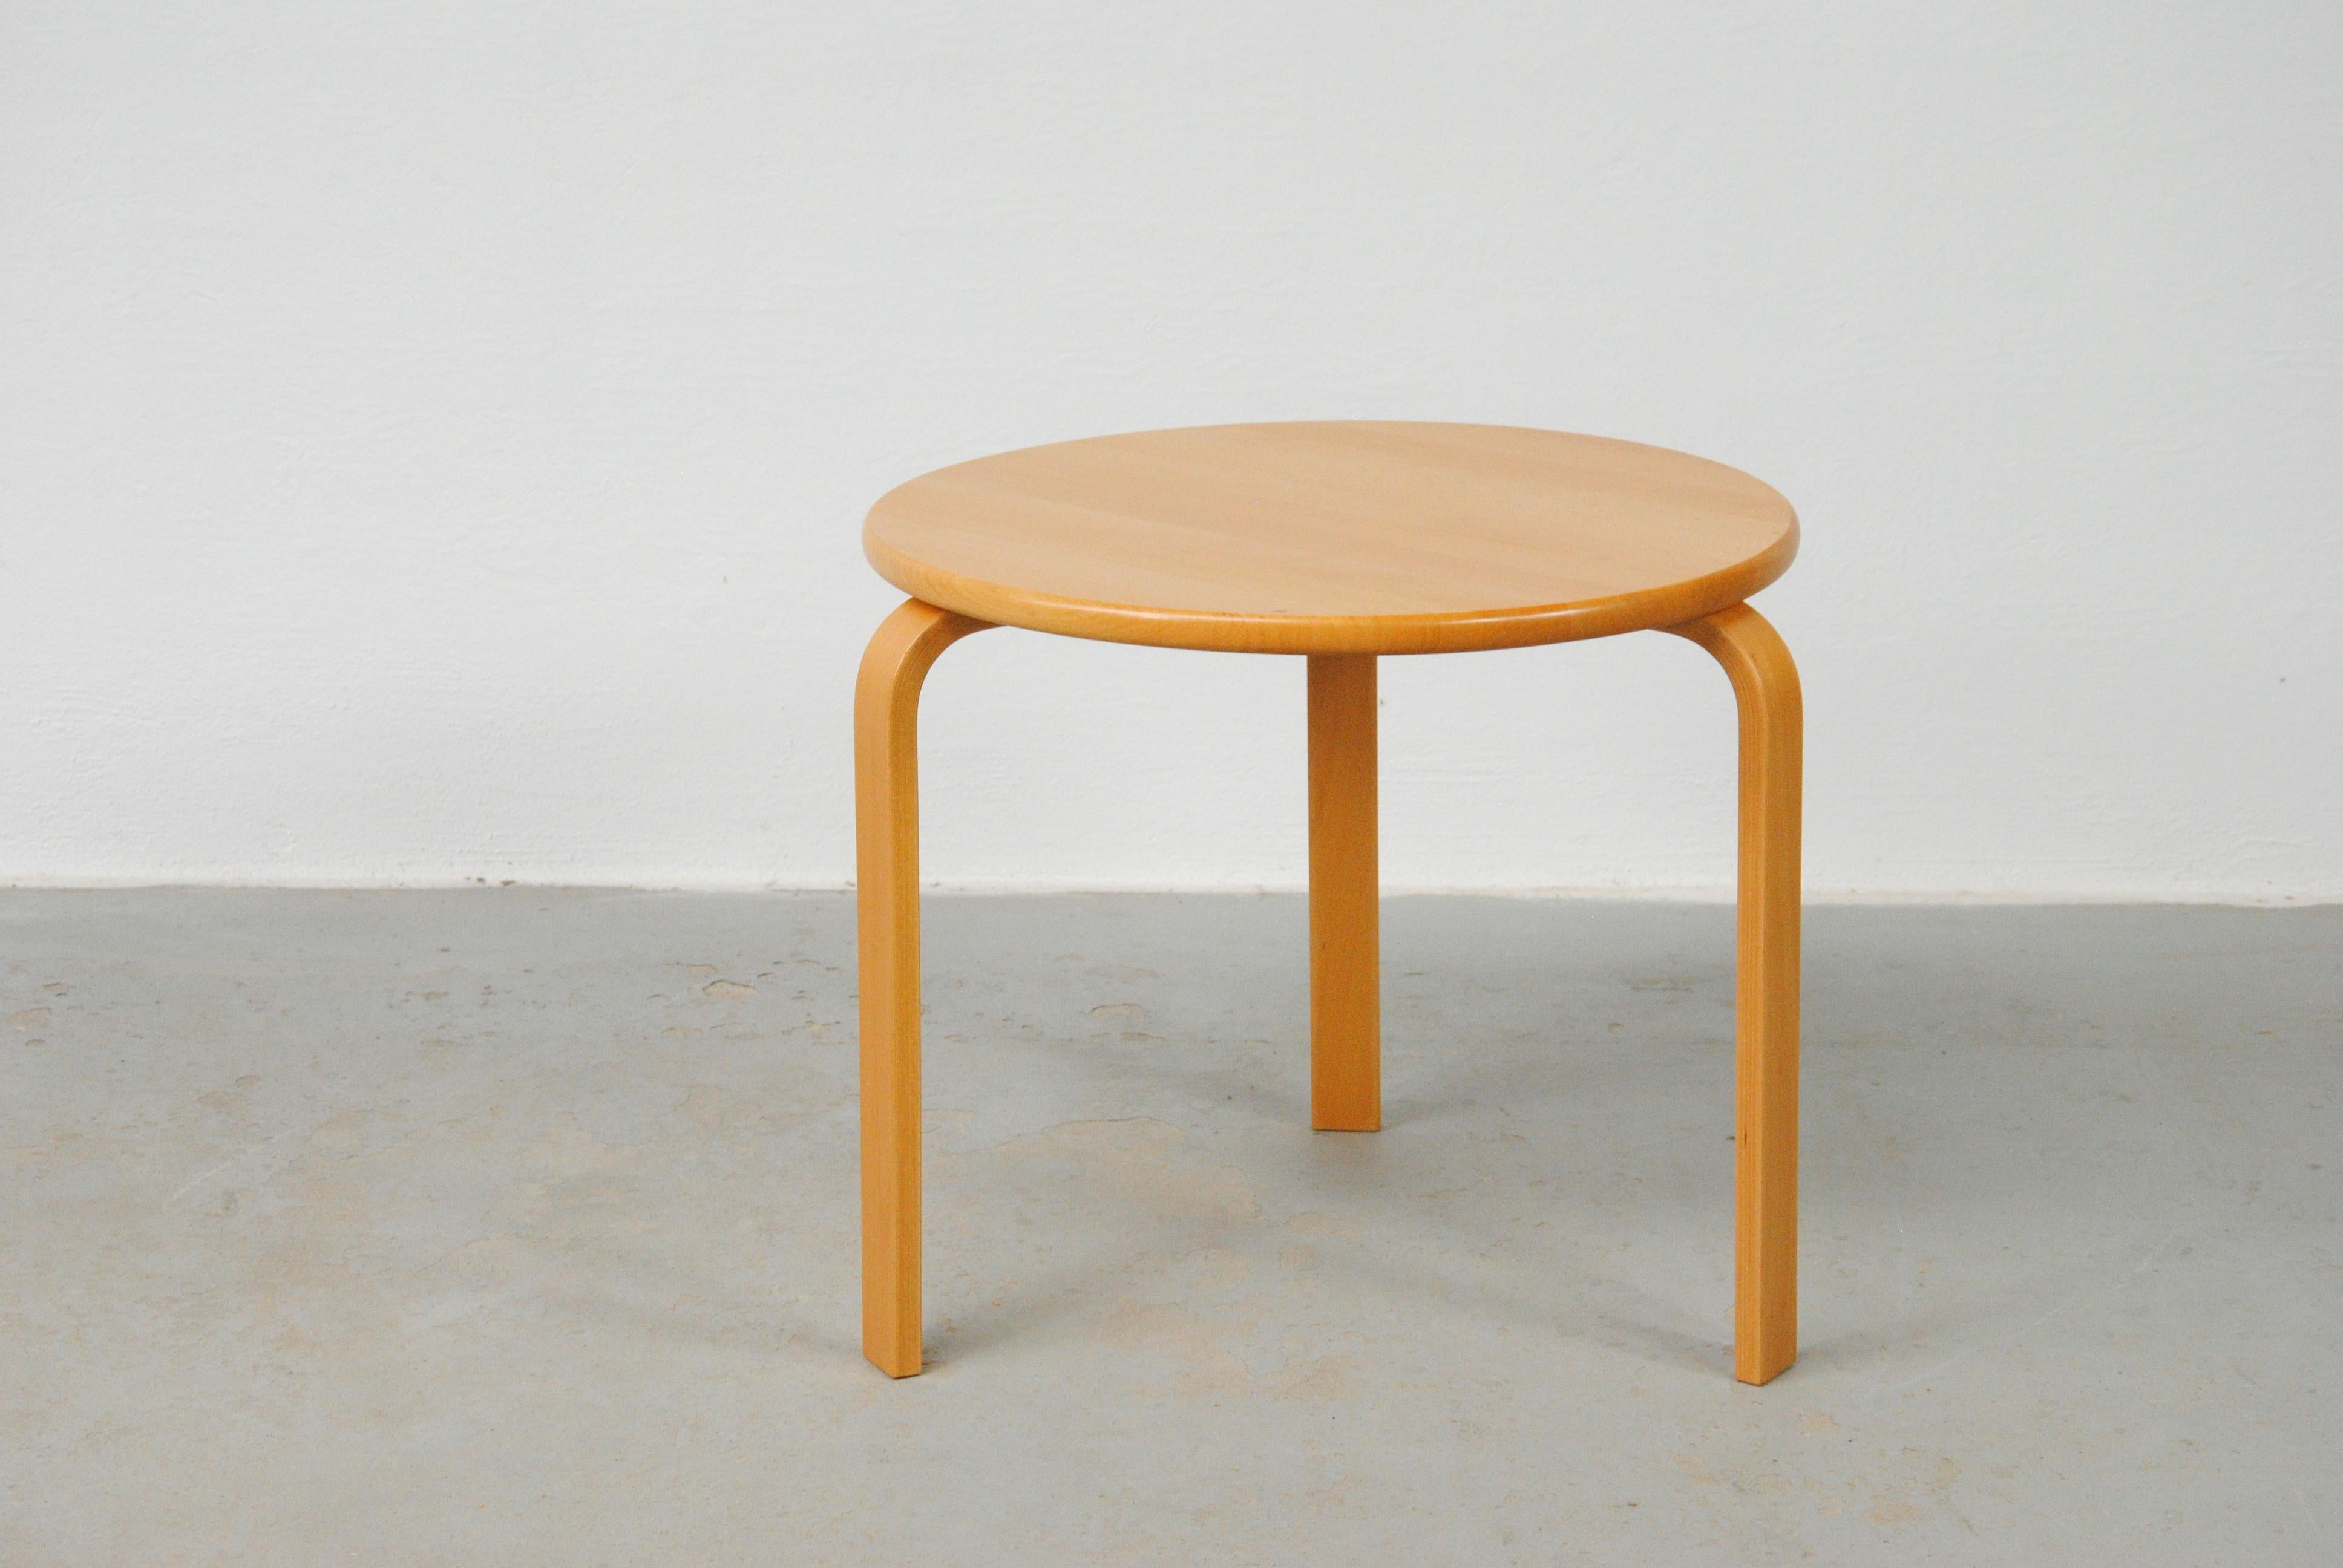 1970´s Fully Restored Danish Bent Silberg Beech Side- and Stacking Tables 

The sidetables feature a simple clean design with their round tabletops and bended organic shaped legs designed to enable the tables to be stacked on top of each other.

The